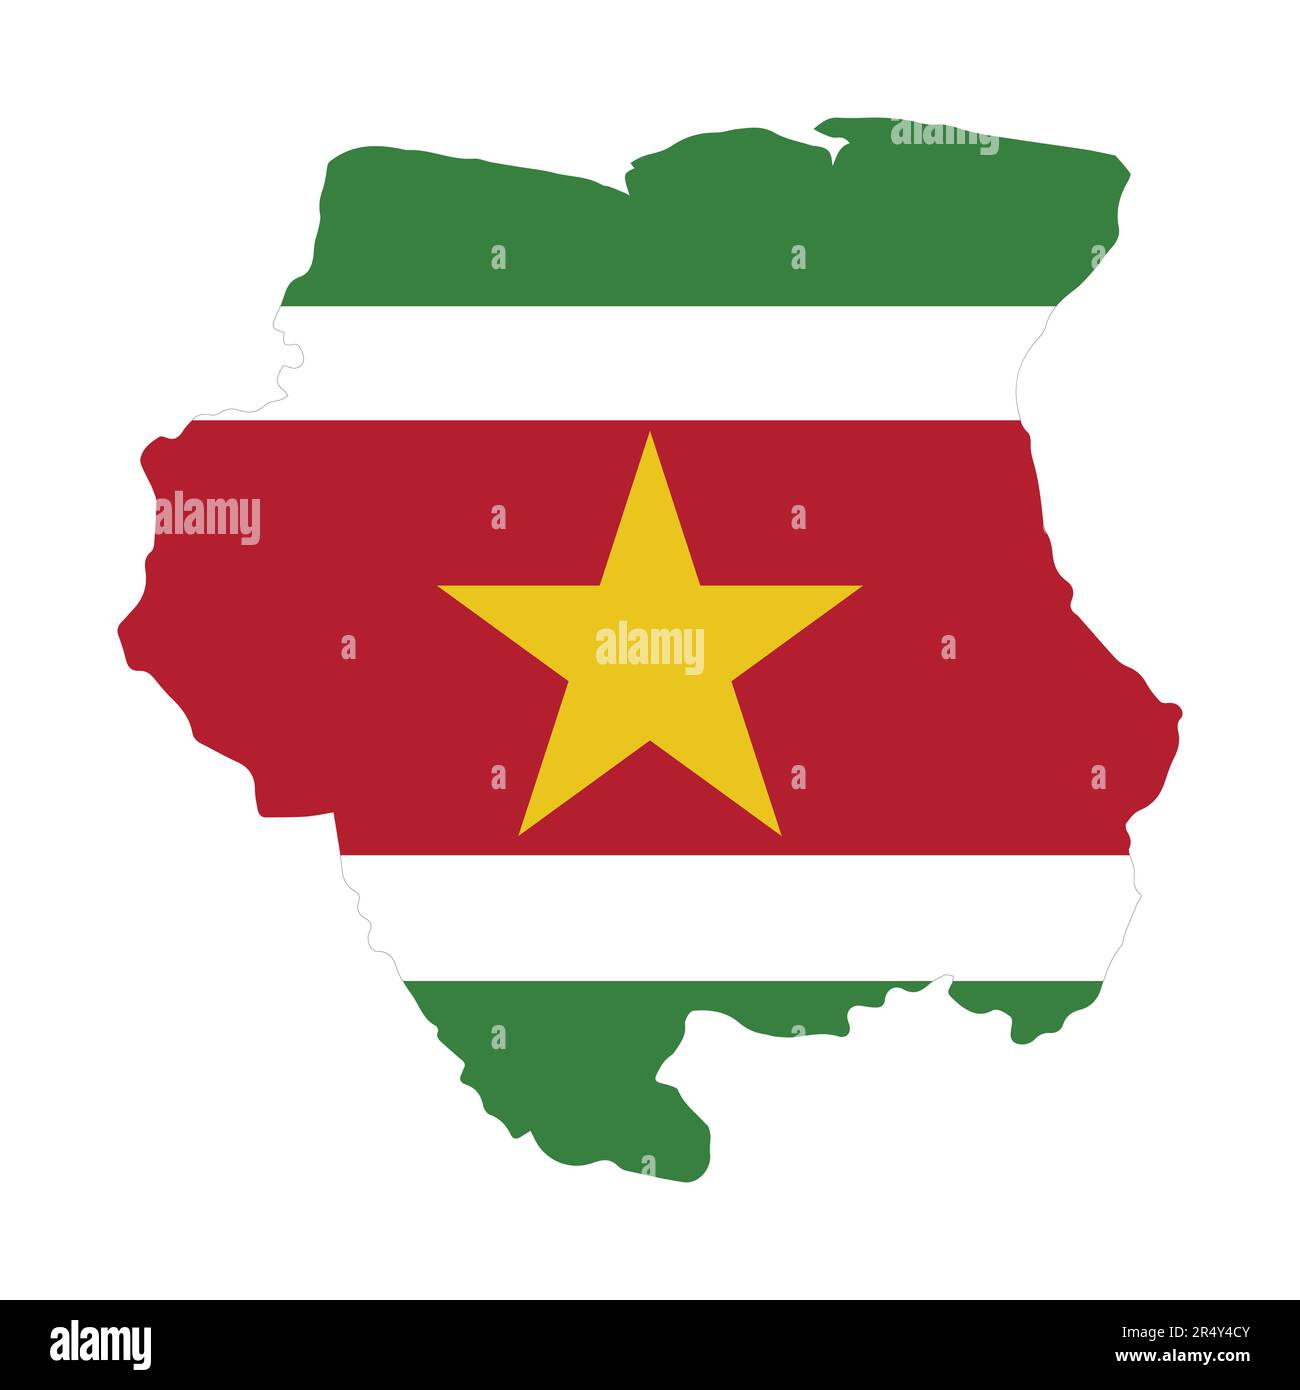 Suriname Country in South America Vector map logo and flag illustration Stock Vector